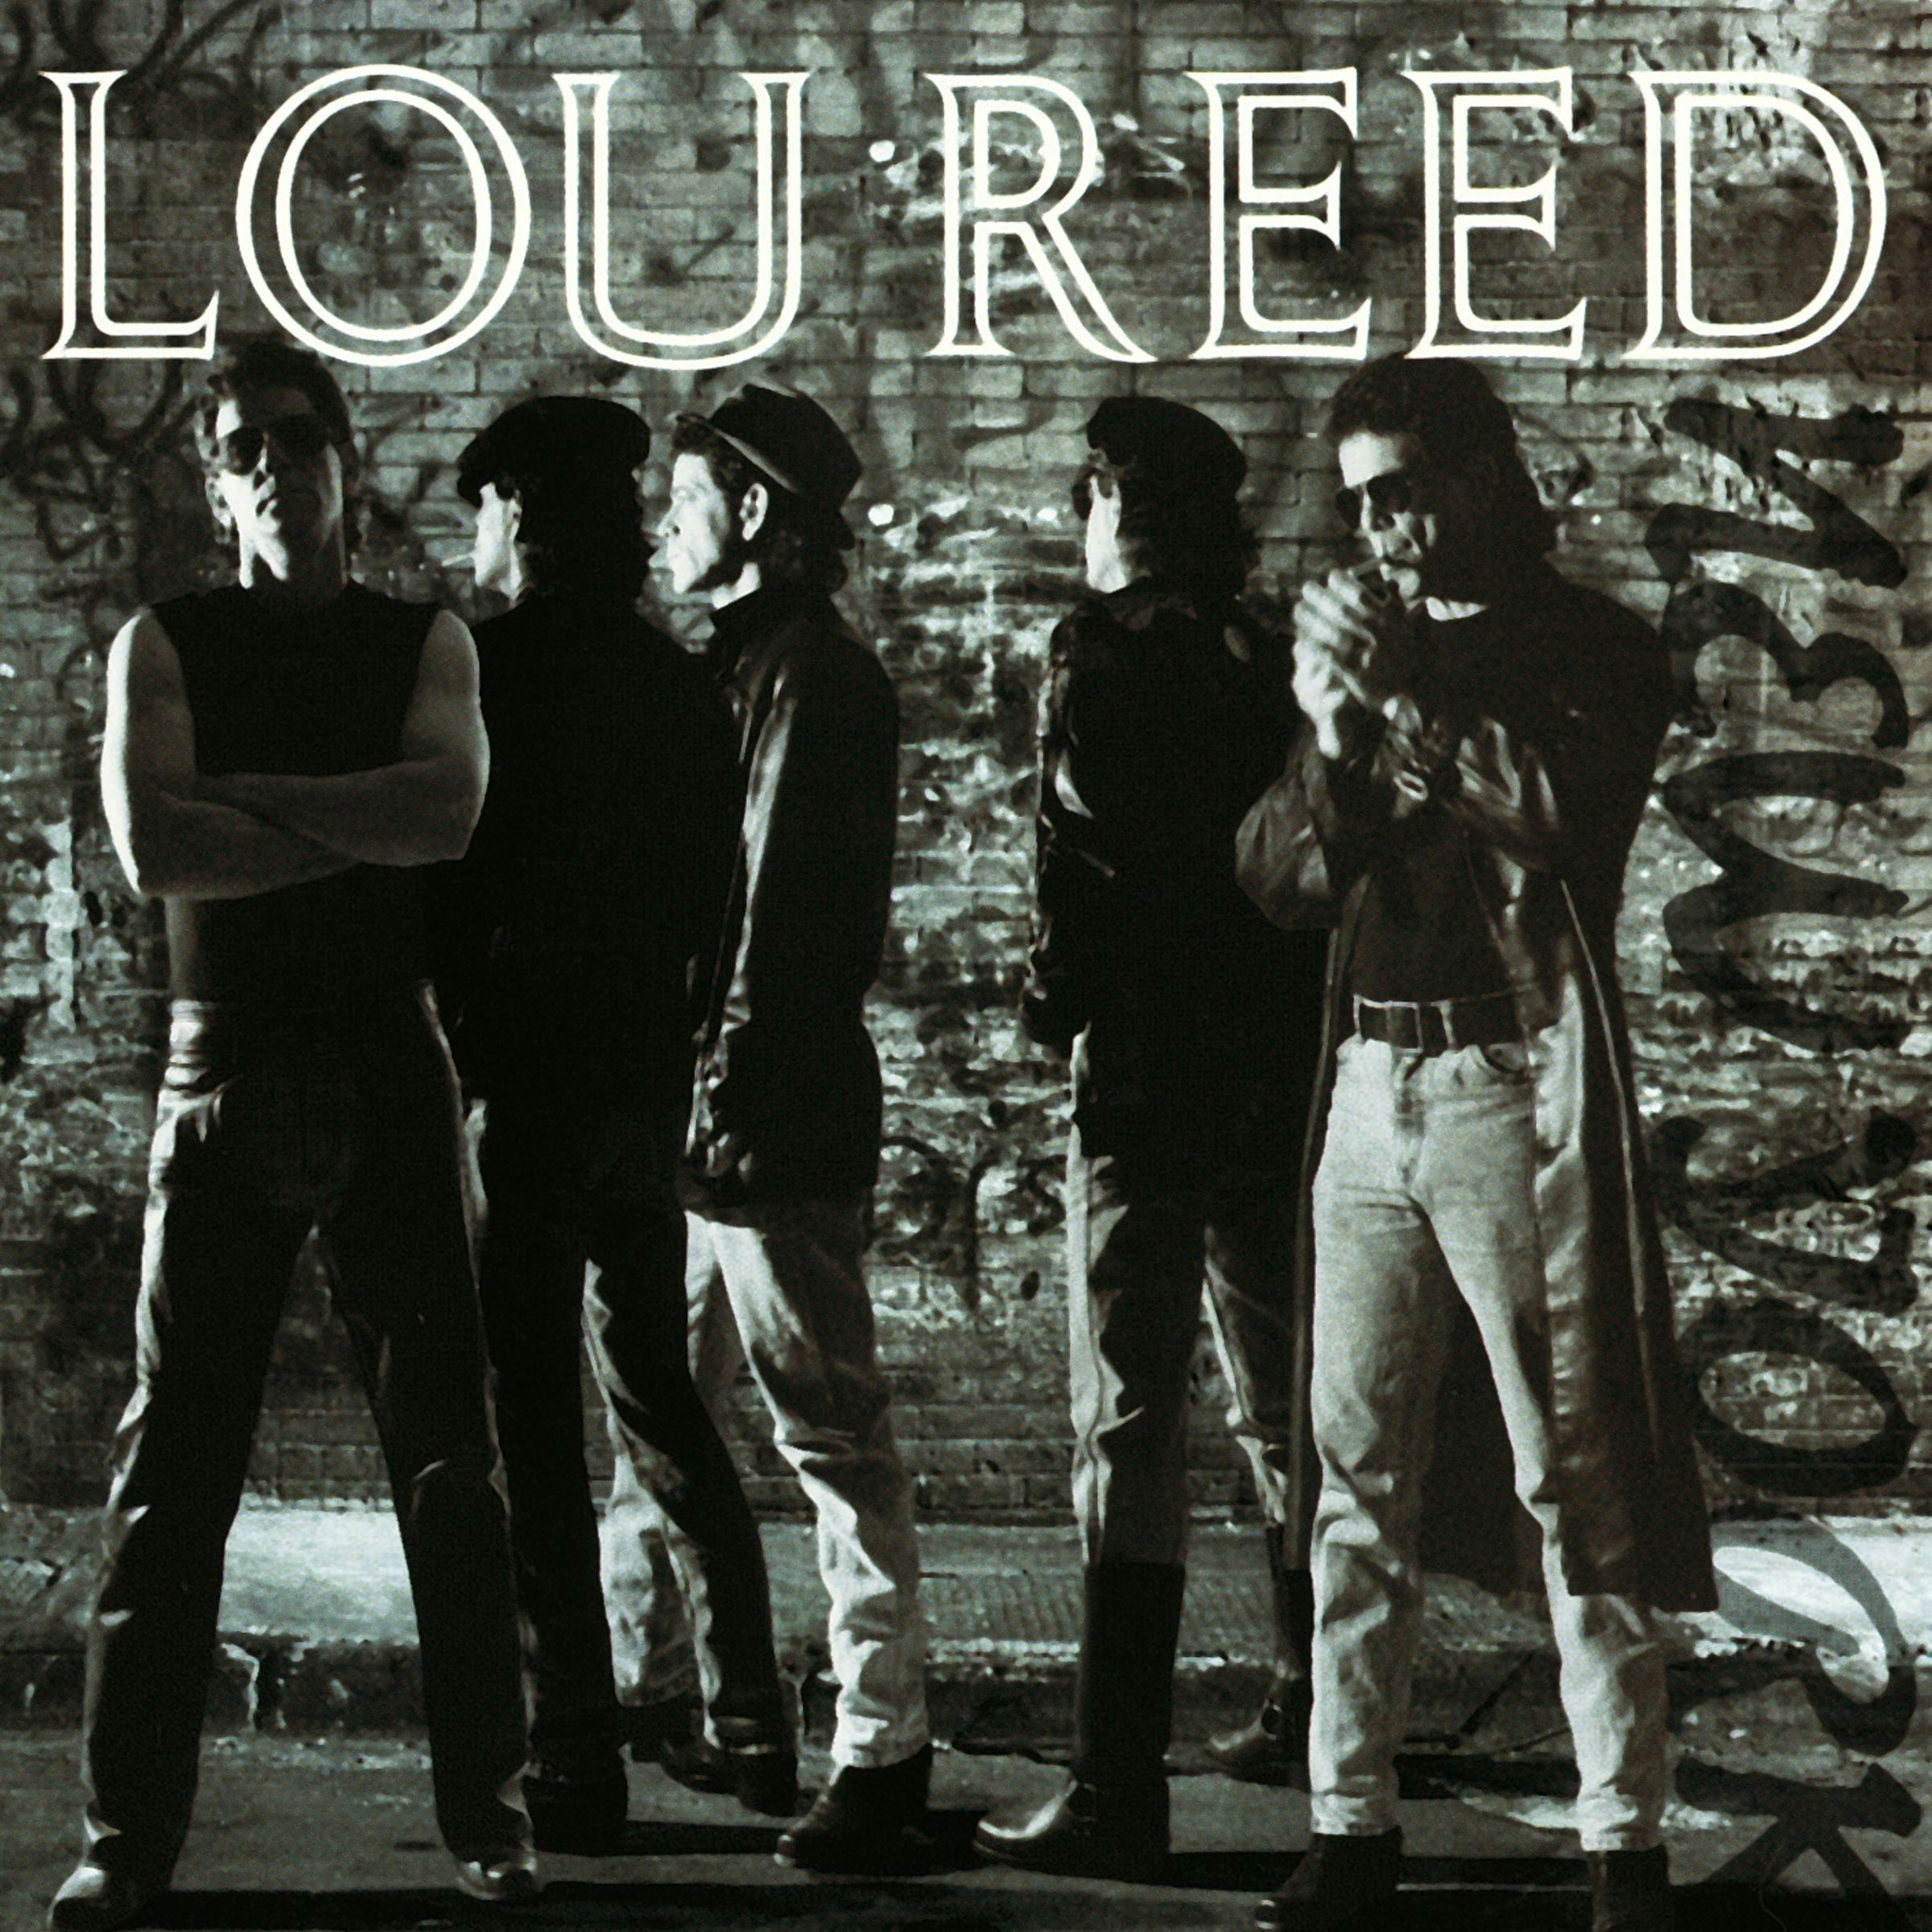 Album artwork for Album artwork for New York by Lou Reed by New York - Lou Reed